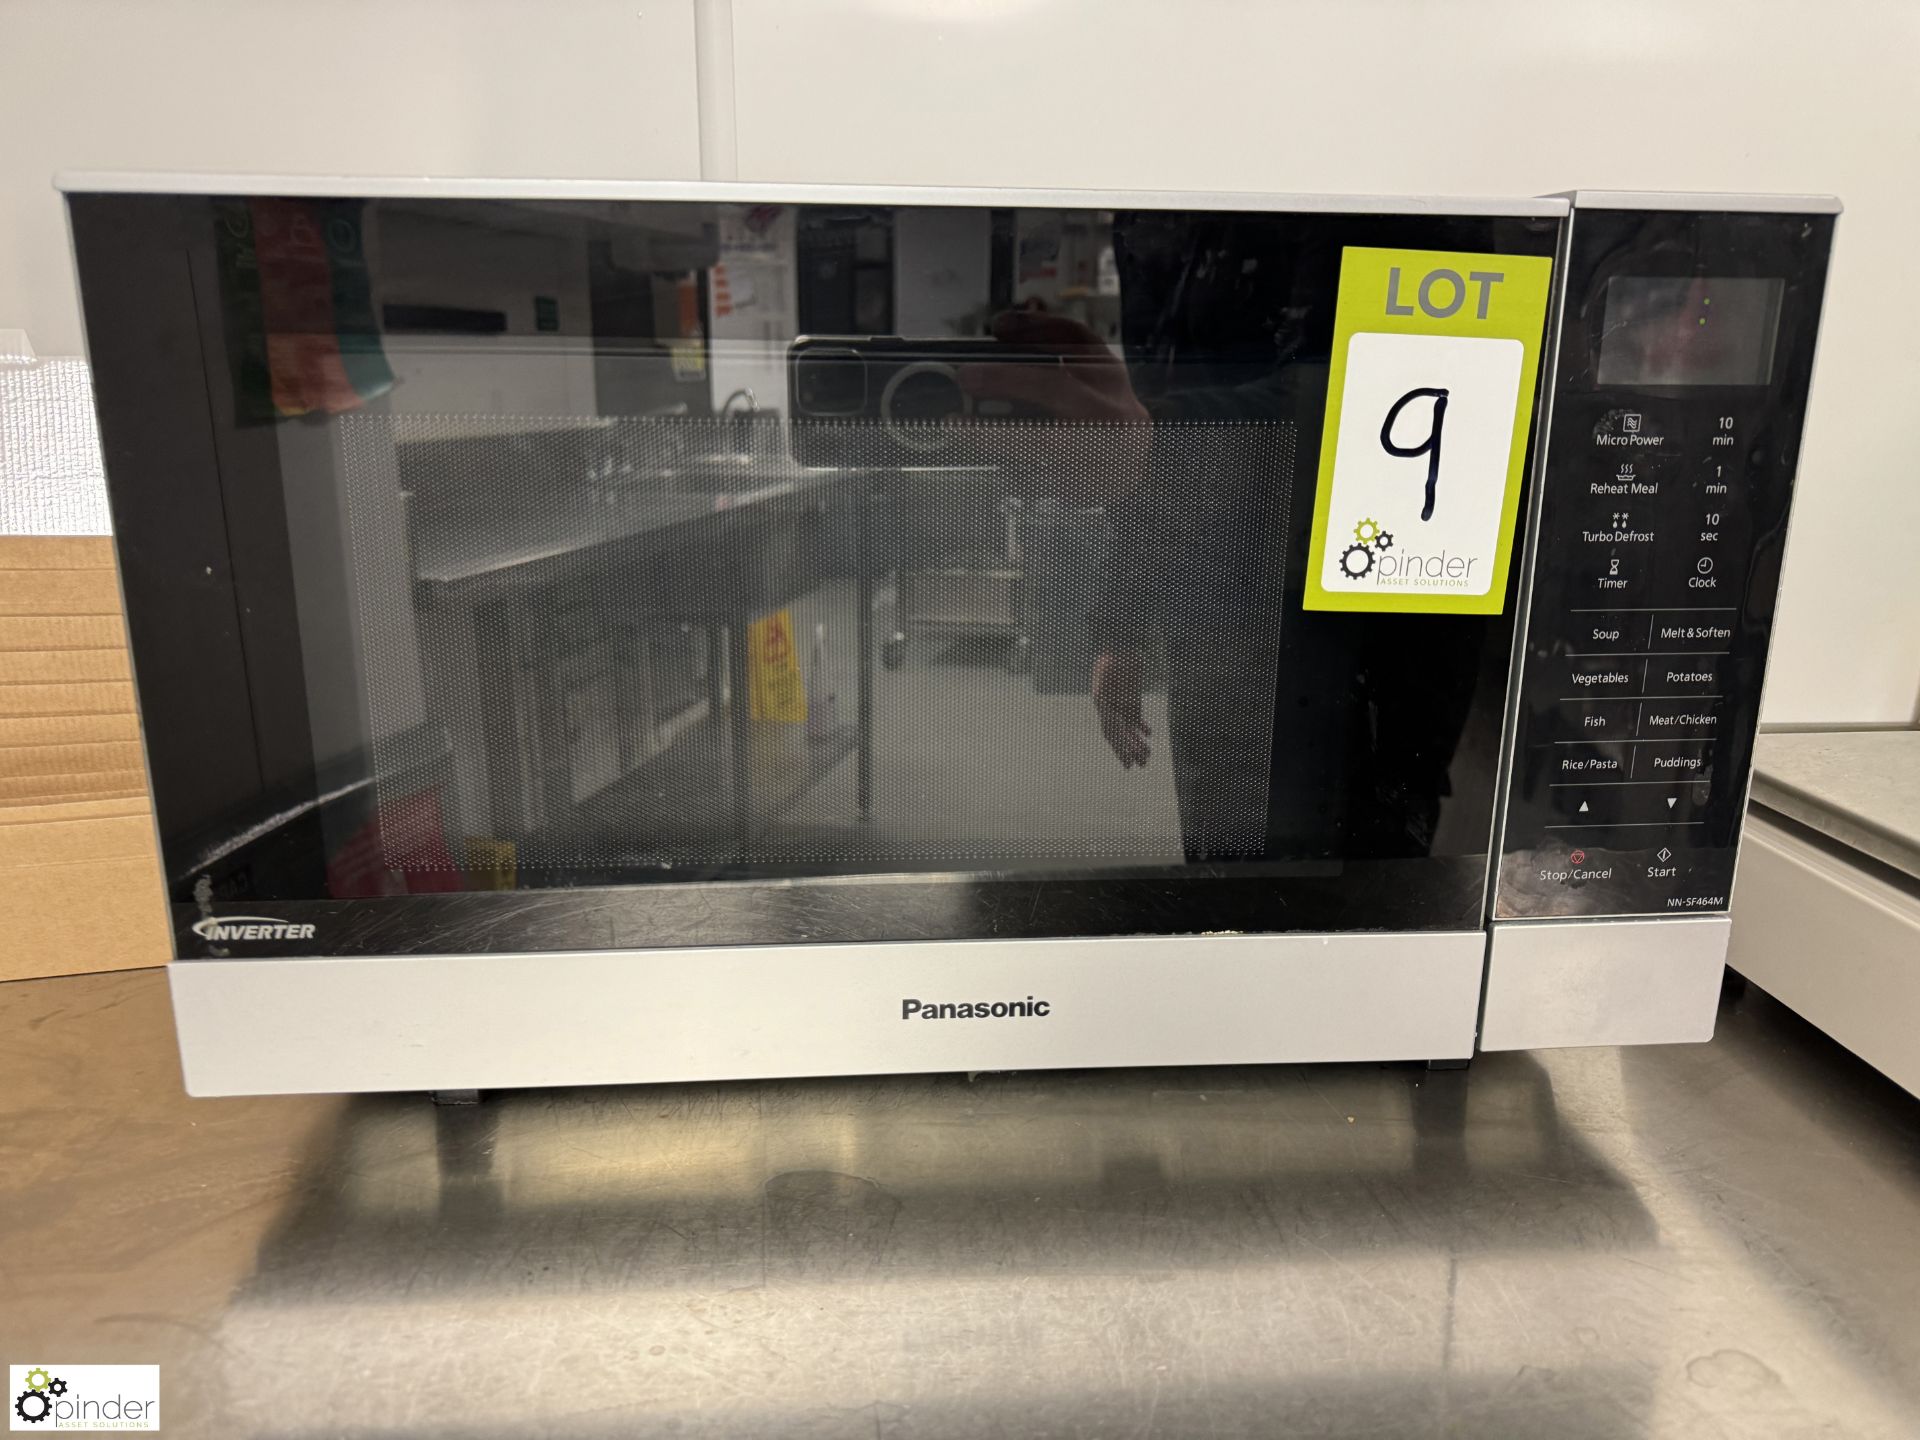 Panasonic NN-SF464M Microwave Oven, 240volts (location in building – basement kitchen 1)